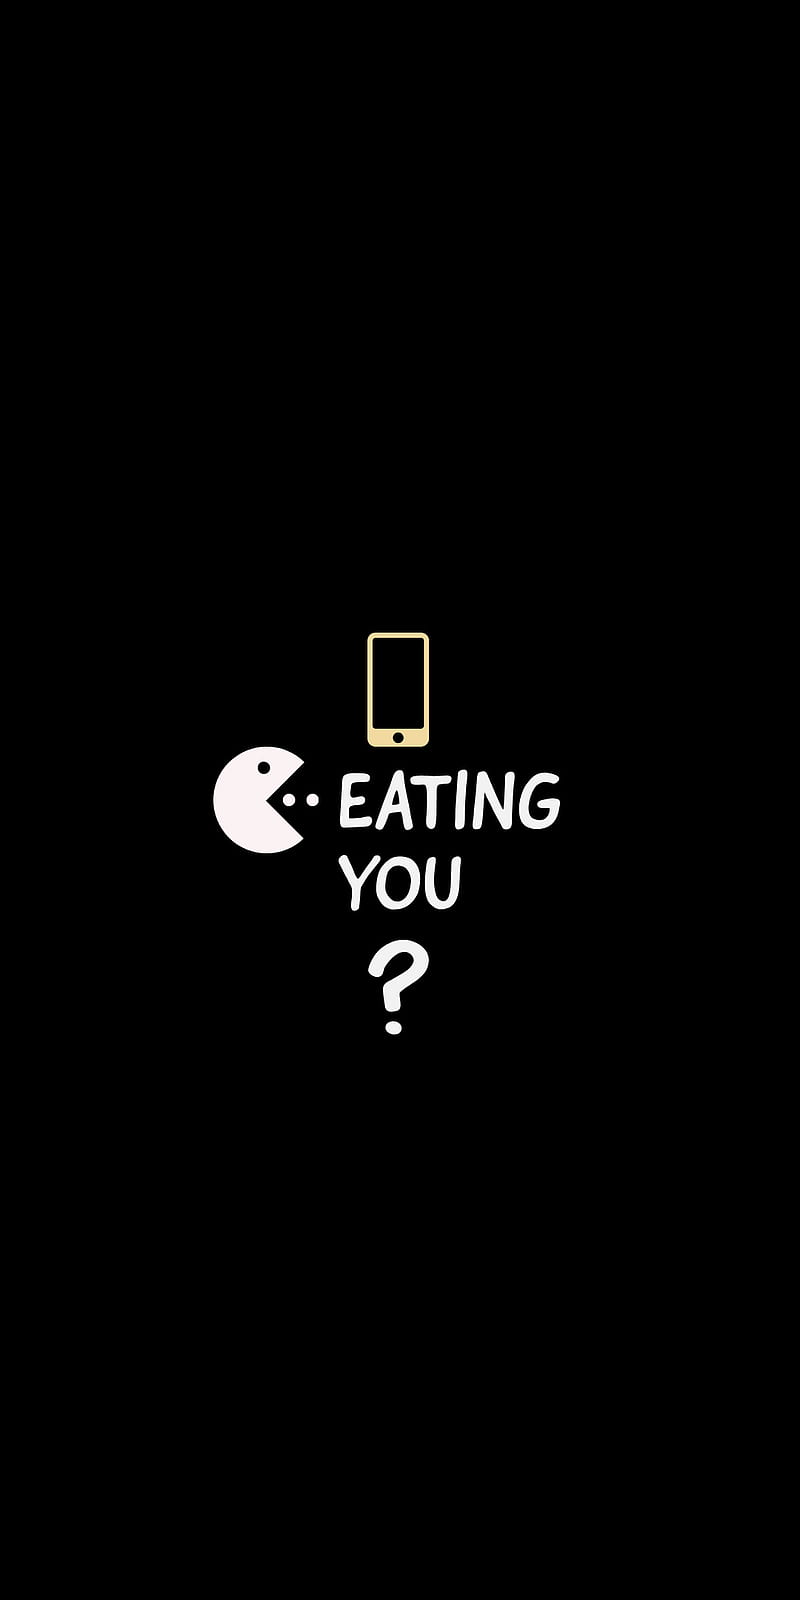 Eating you, black, iphone, motivational, oled, samsung, smartphone, thinking, trending, truth, xiaomi, HD phone wallpaper